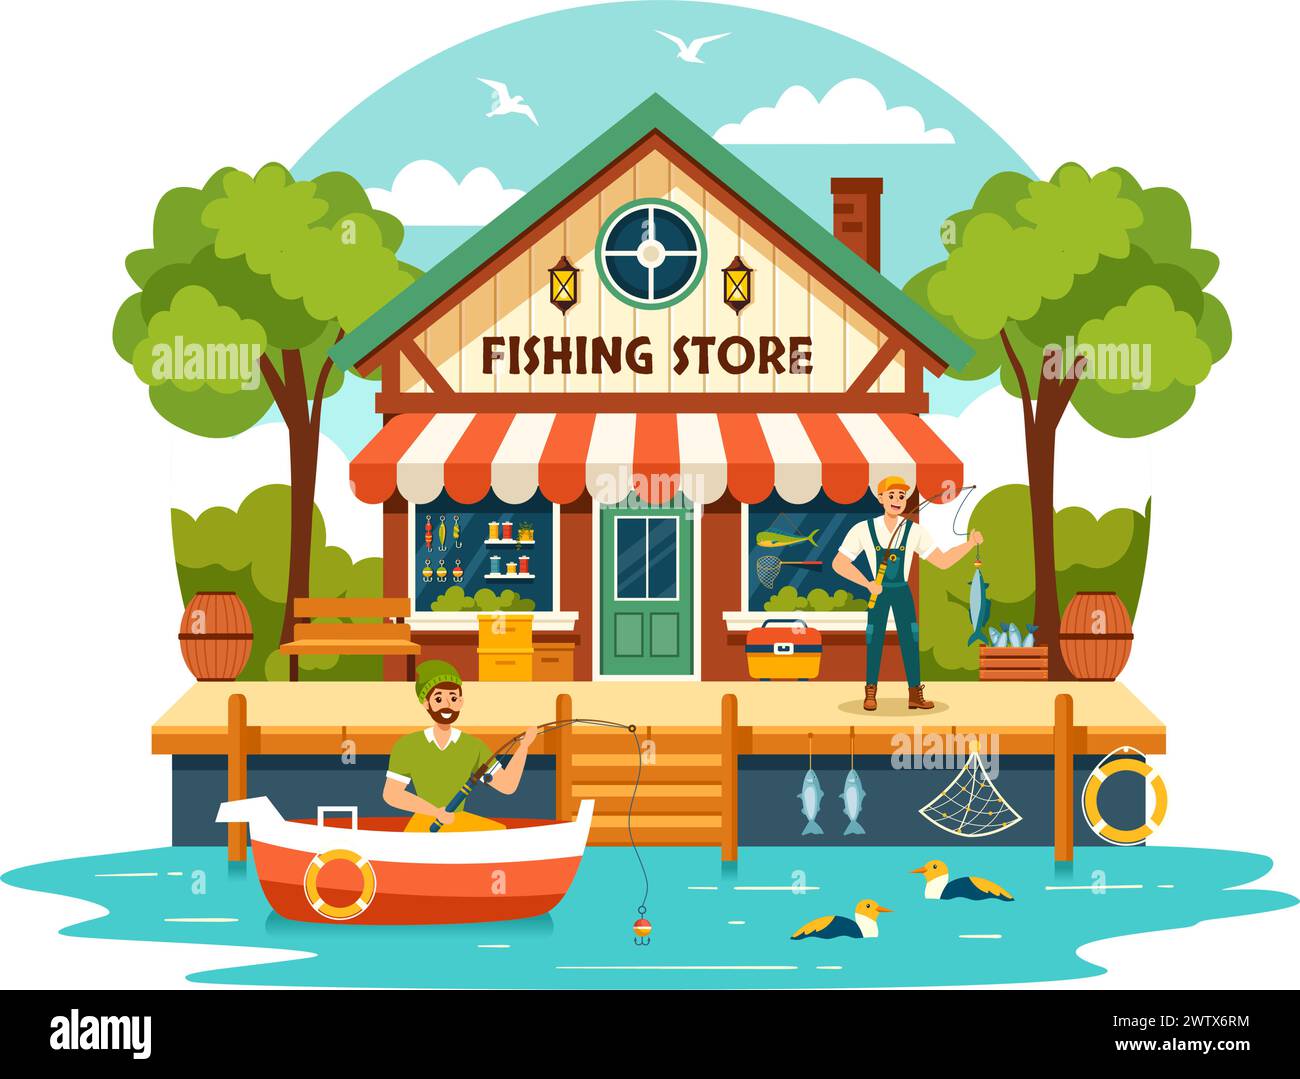 Fishing Store Vector Illustration with Selling Various Fishery Equipment, Bait, Fish Catching Accessories or Items on Flat Cartoon Background Stock Vector